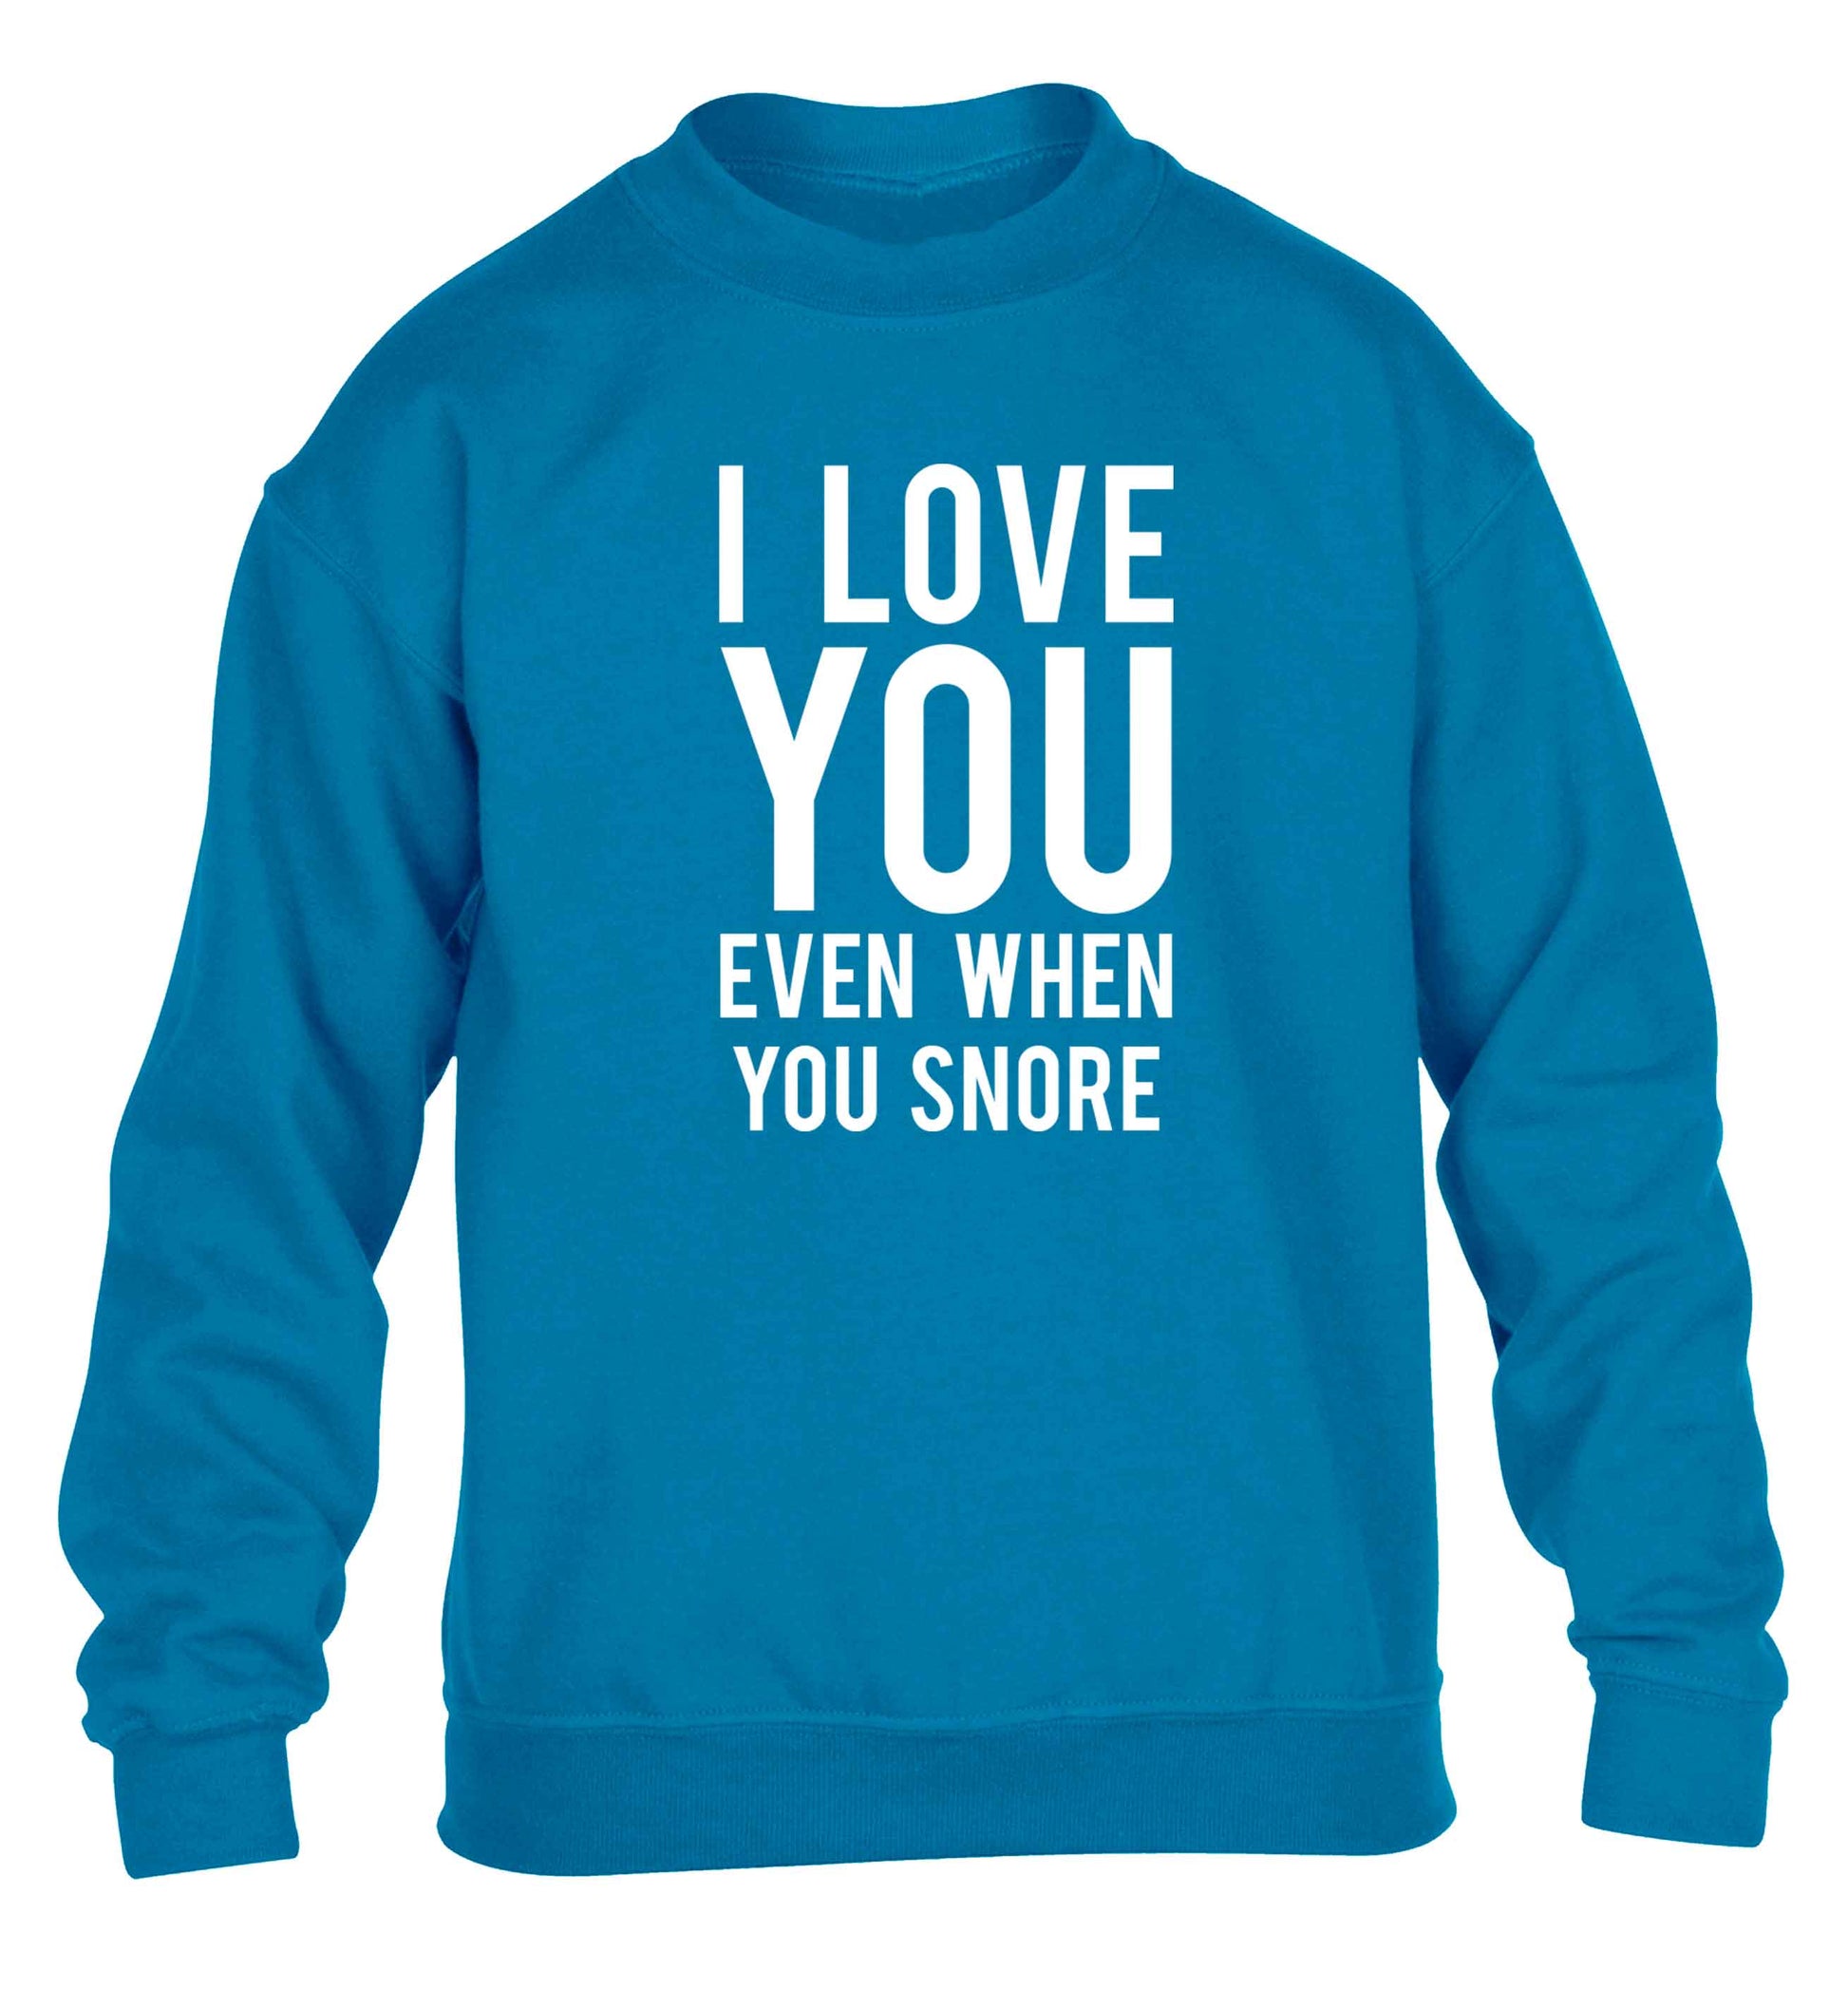 I love you even when you snore children's blue sweater 12-13 Years